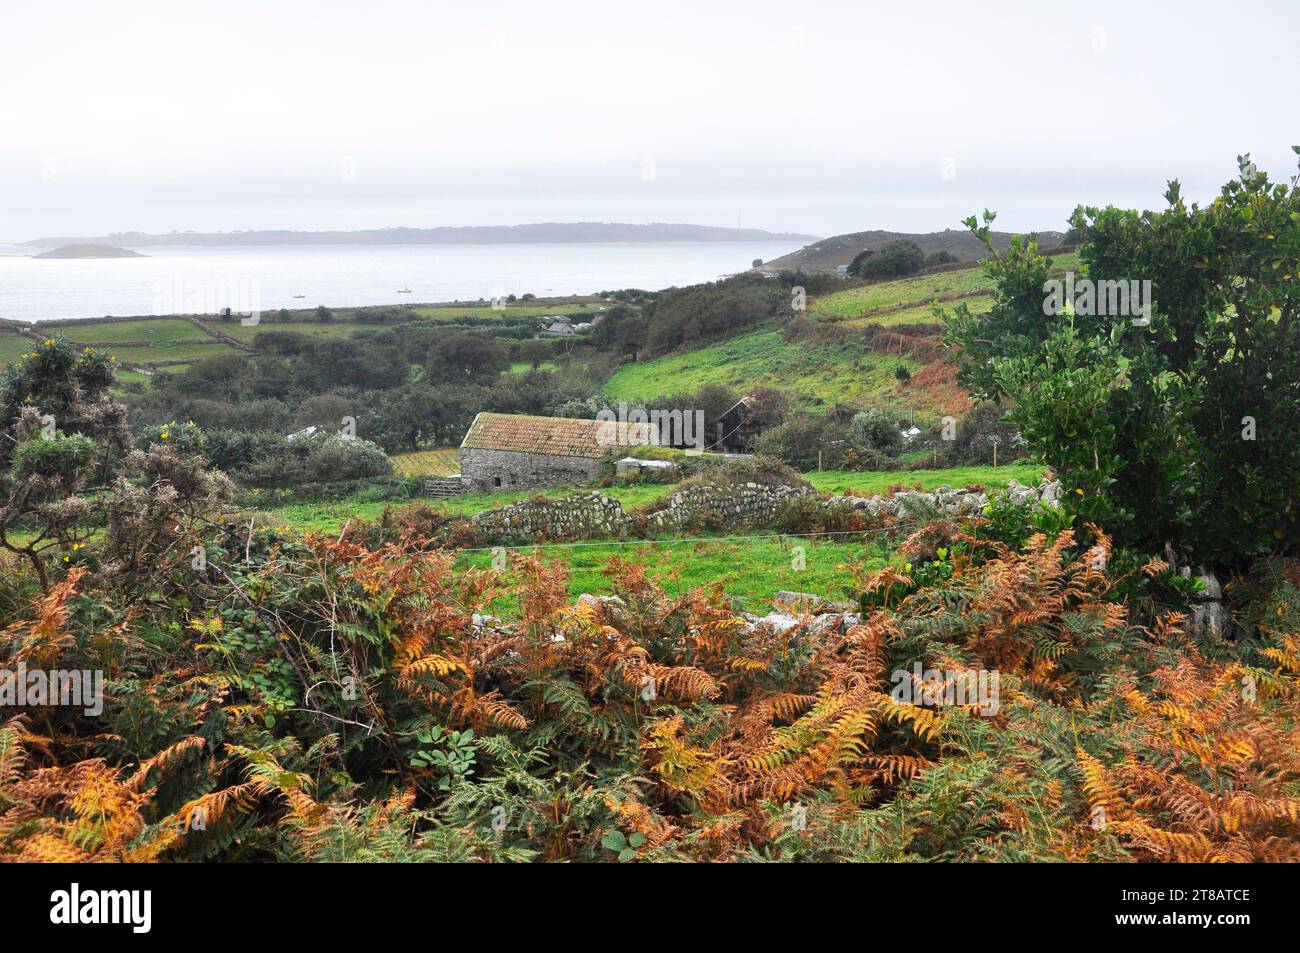 Peace and tranquility captured by the quiet autumn landscape of the island of St Martins in the Isles of Scilly. The small fields edged by dry stone w Stock Photo